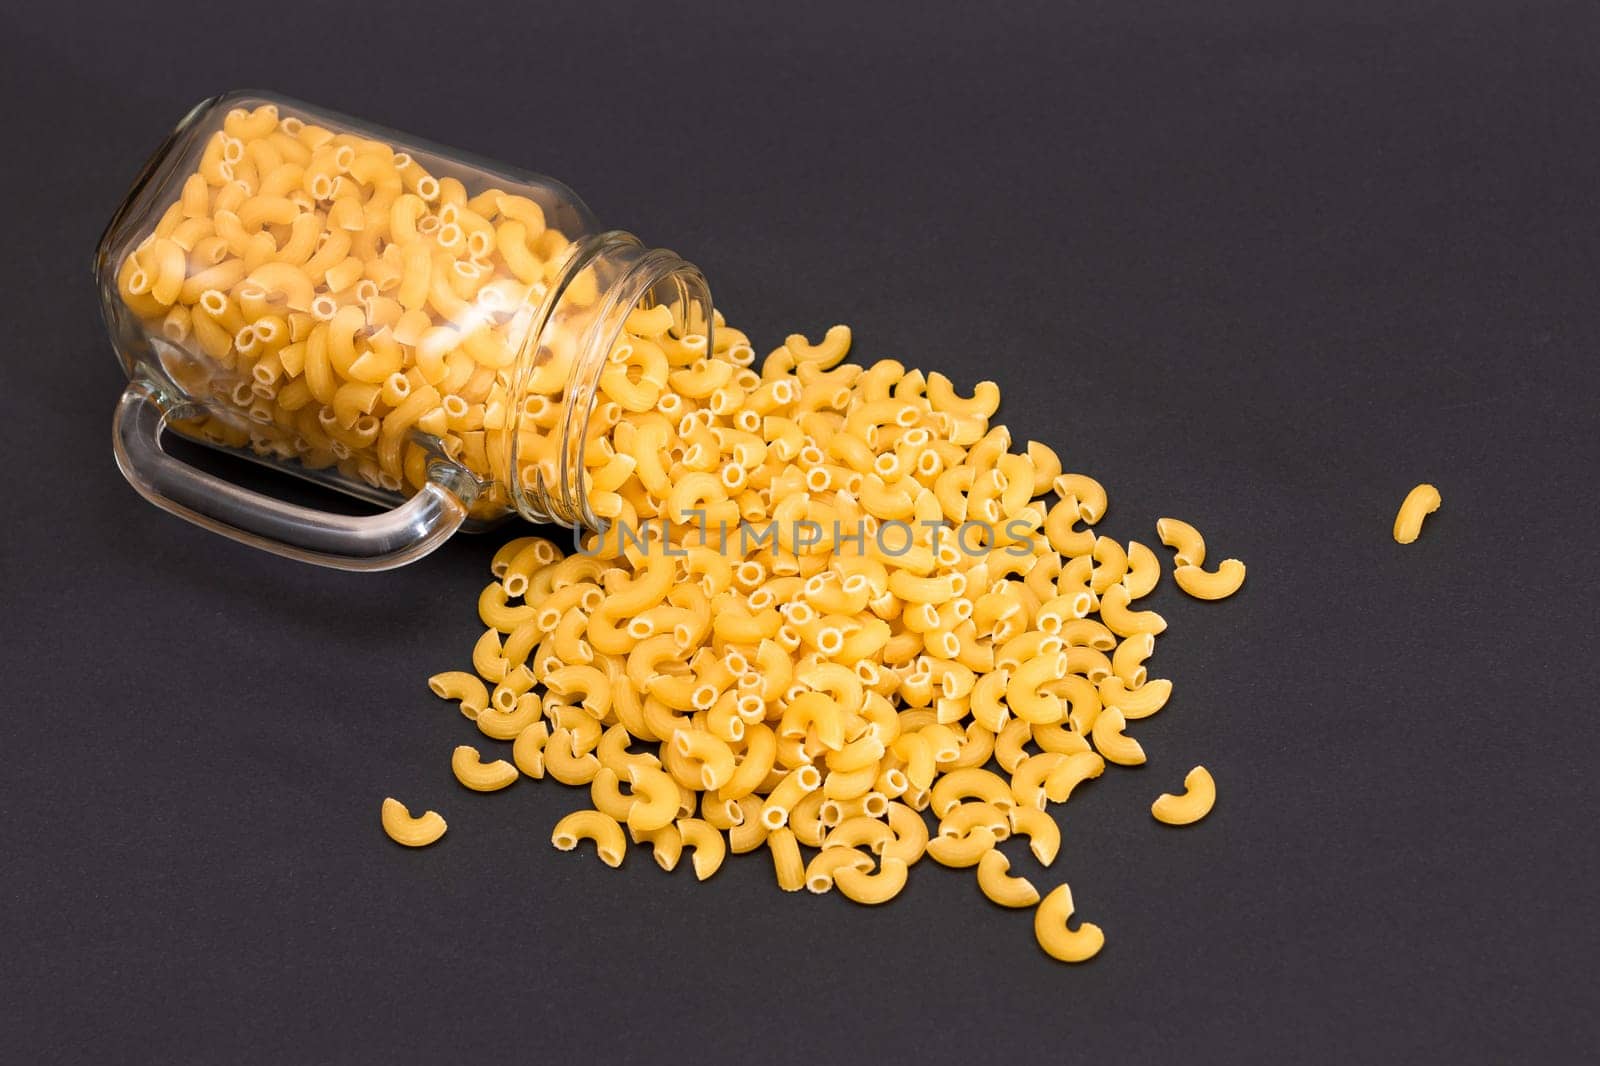 Uncooked Chifferi Rigati Pasta in Glass Jar on Black Background. Fat and Unhealthy Food. Scattered Classic Dry Macaroni. Italian Culture and Cuisine. Raw Pasta